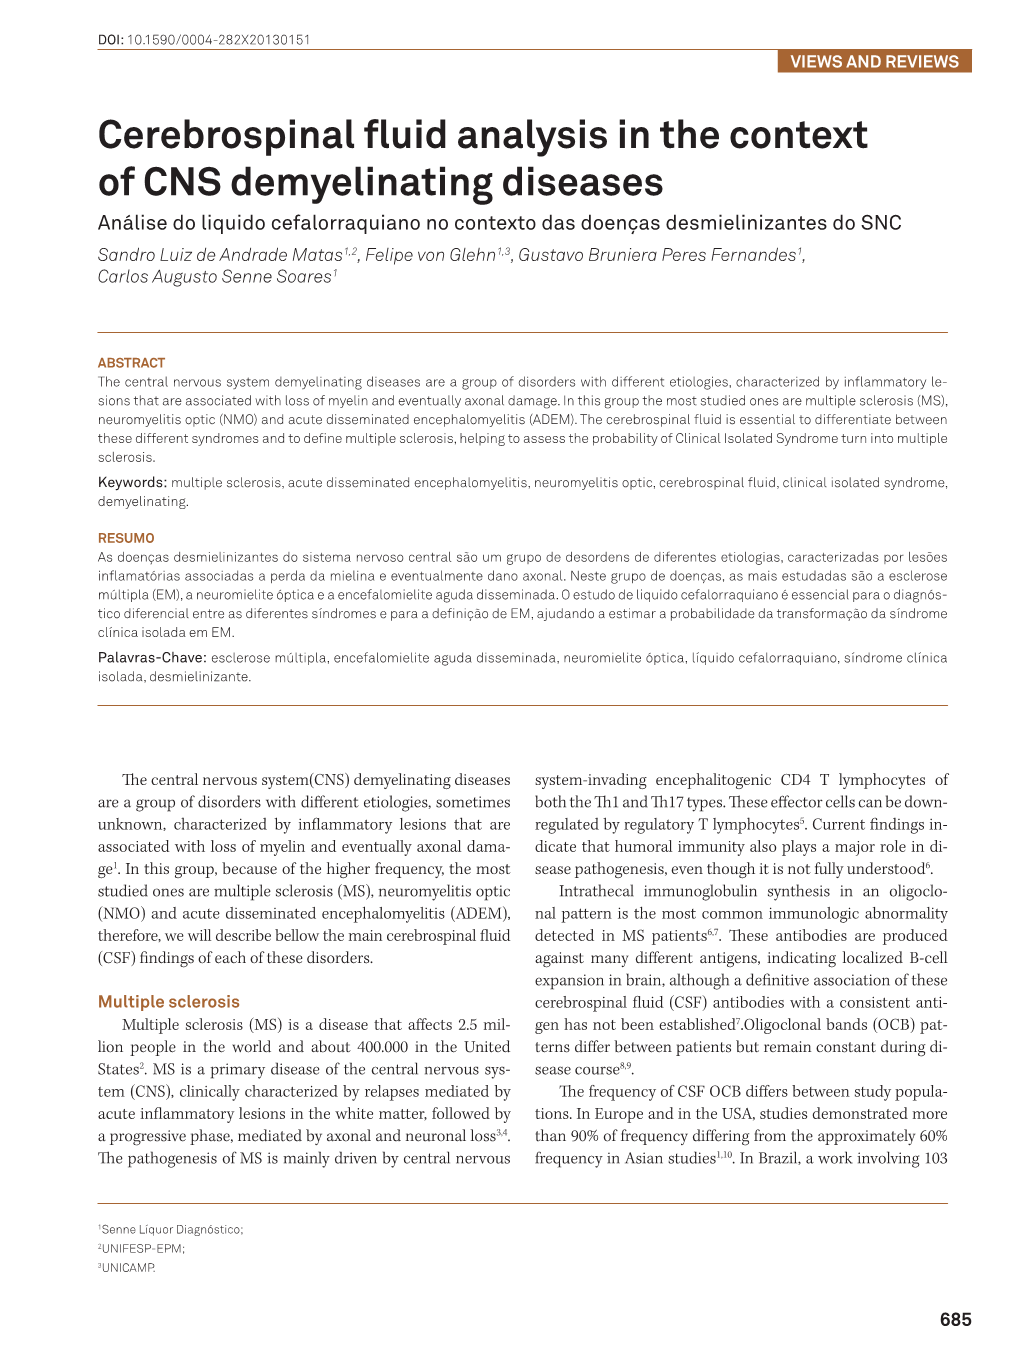 Cerebrospinal Fluid Analysis in the Context of CNS Demyelinating